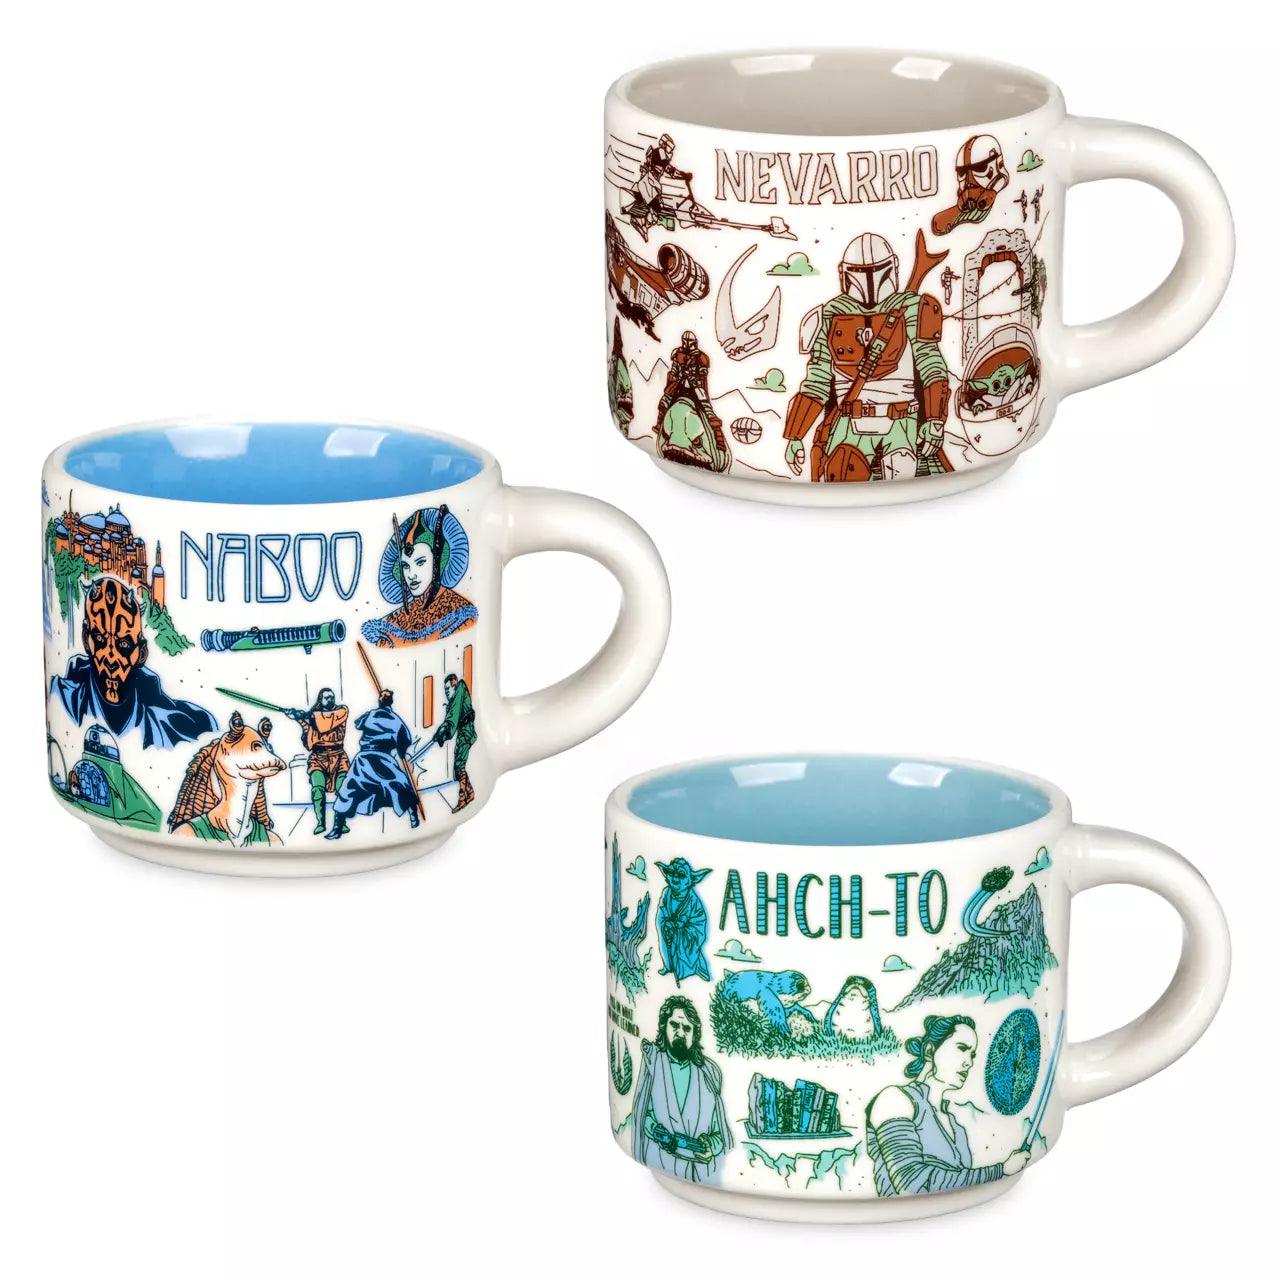 Nevarro, Naboo and Ahch-To Starbucks® Mug Ornament Set – Been There Series  – Star Wars